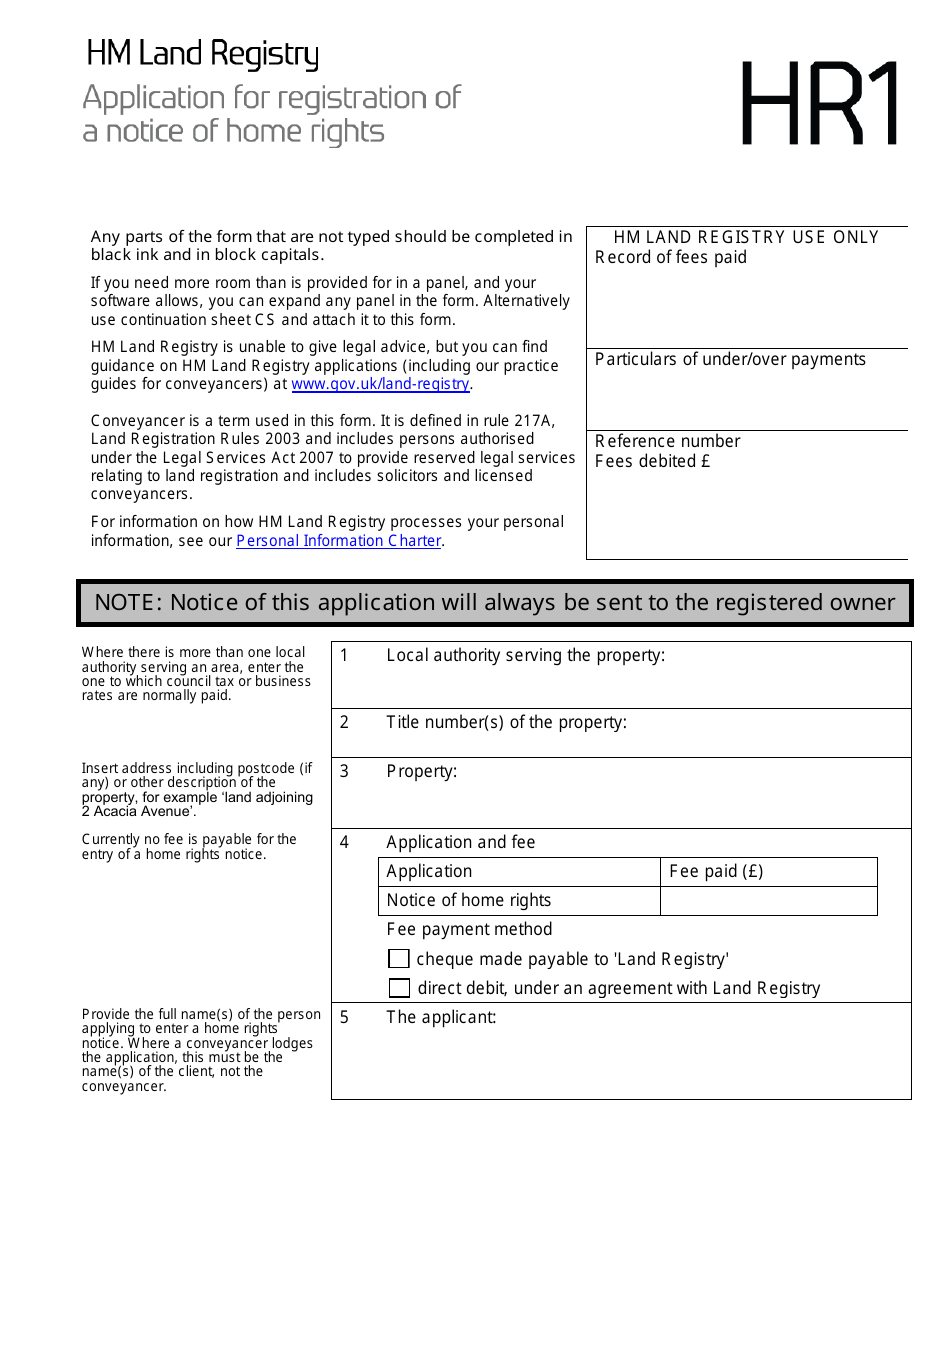 Form HR1 Application for Registration of a Notice of Home Rights - United Kingdom, Page 1